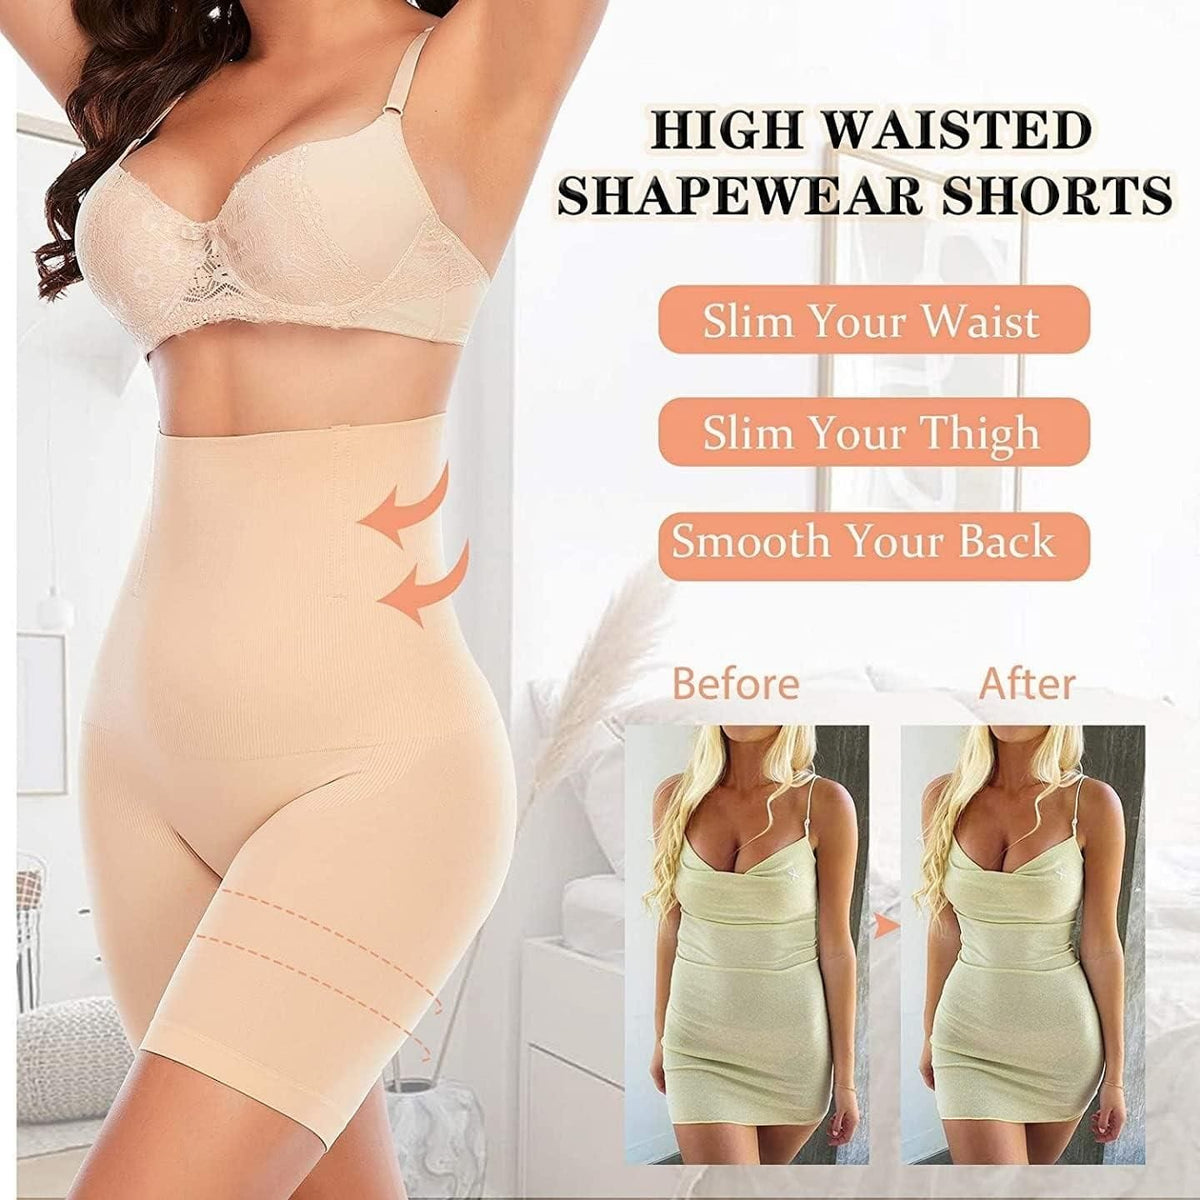 Shop New Cross Compression High Waisted Shaper with great